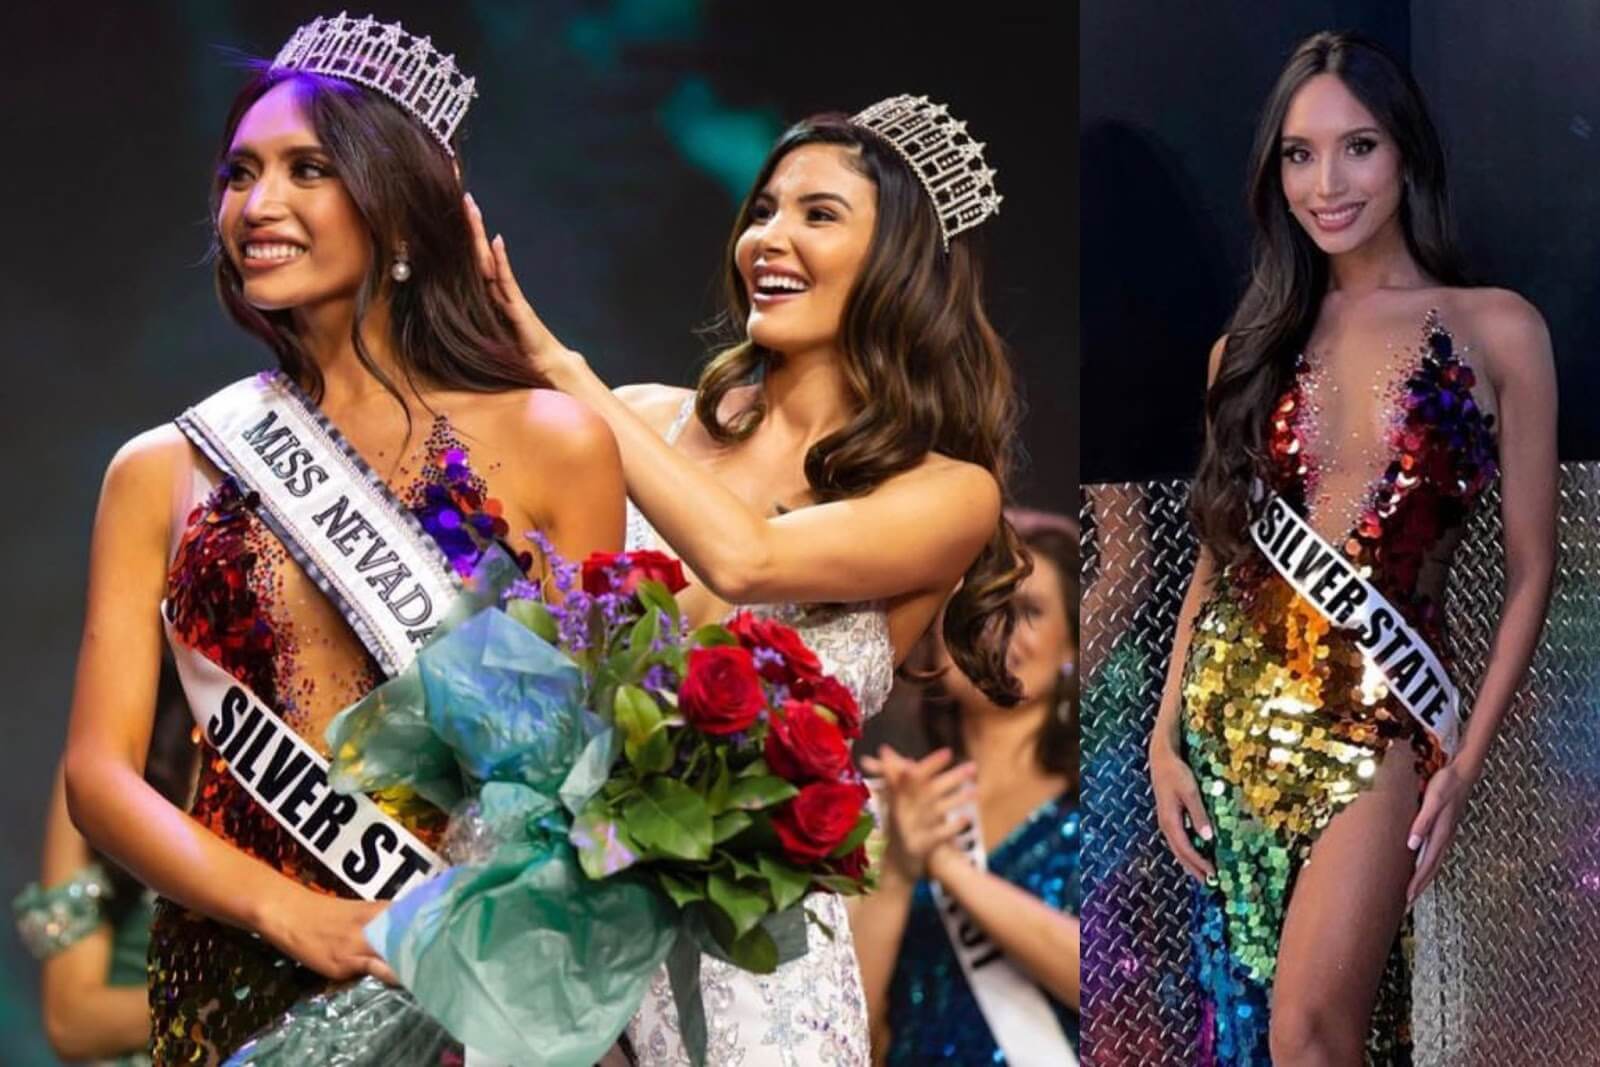 Kataluna Enriquez: Filipino-American and Nevada Native is Crowned First Transgender Miss USA Contestant